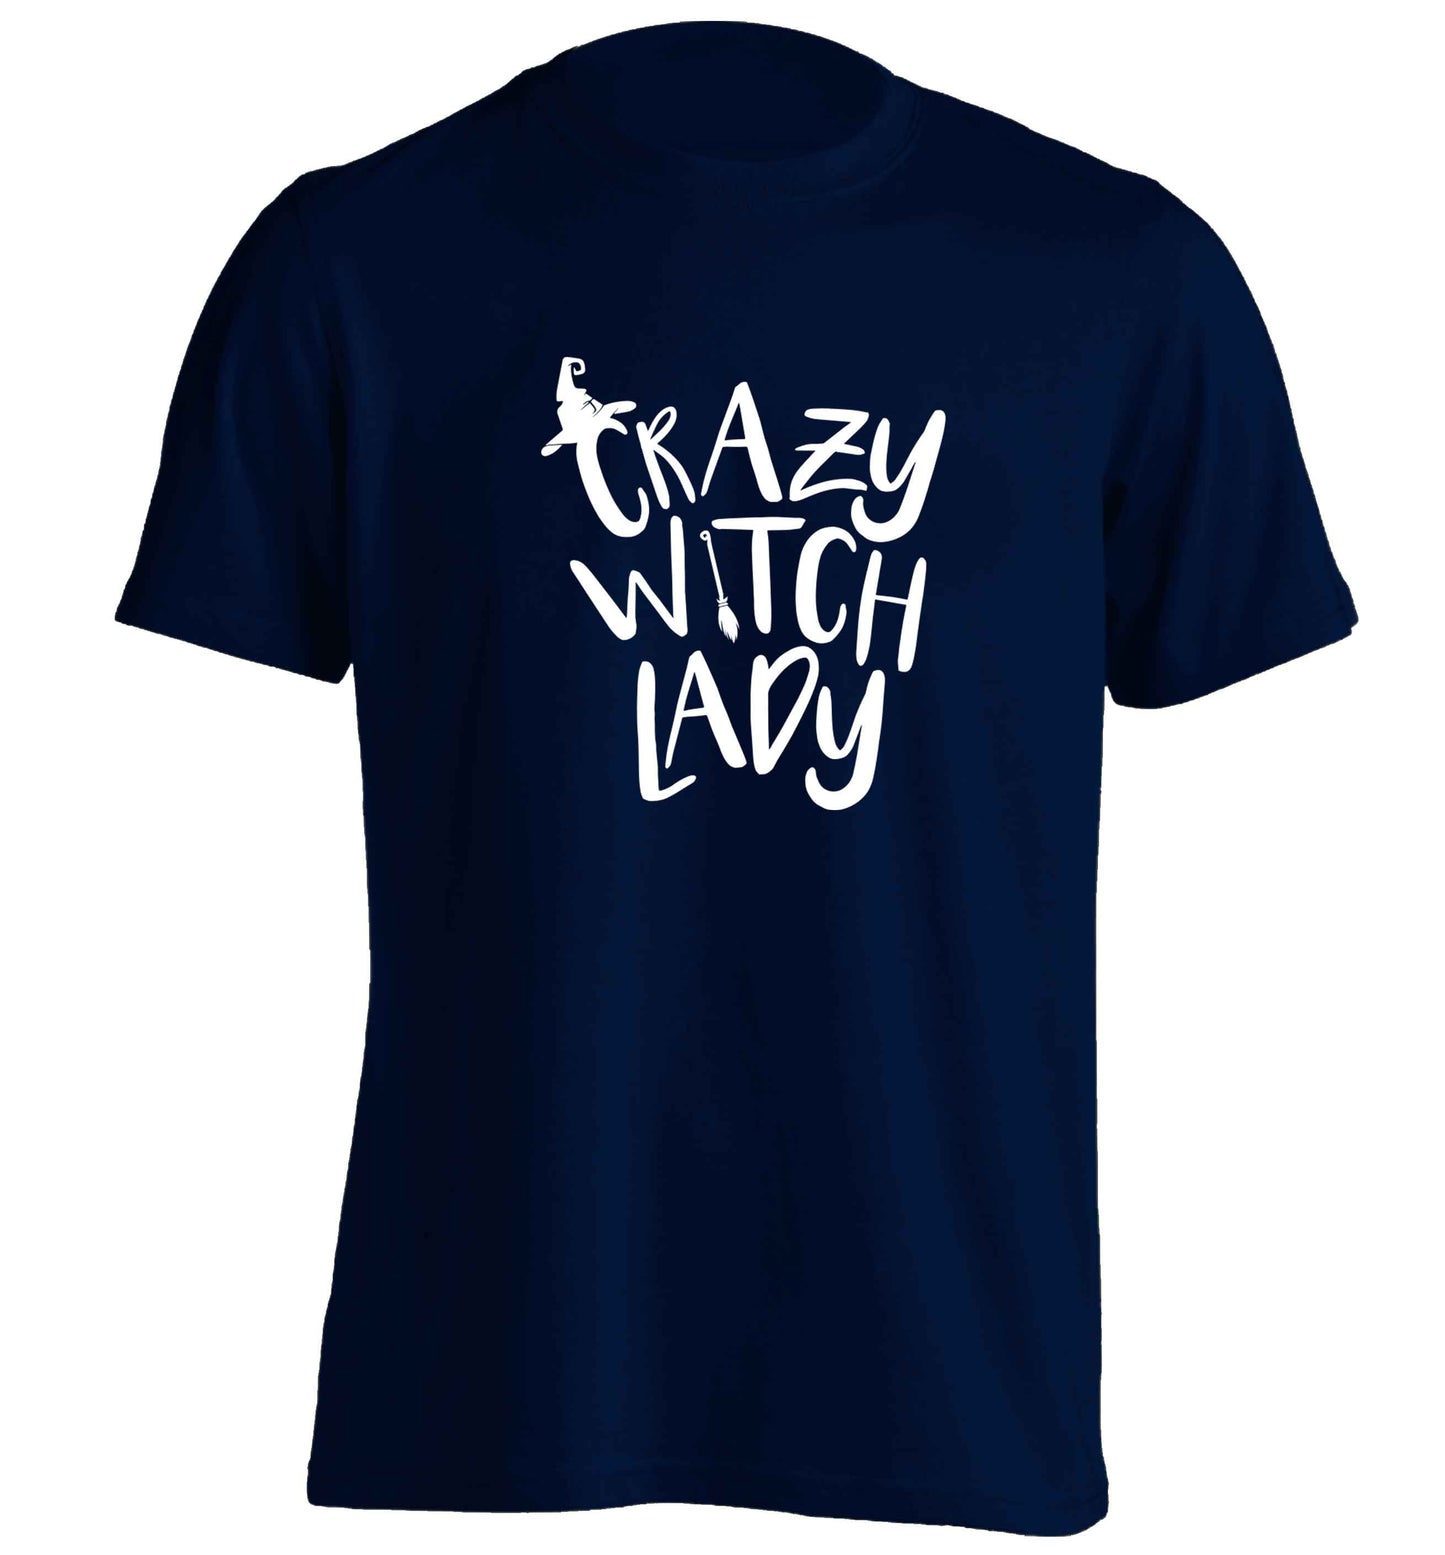 Crazy witch lady adults unisex navy Tshirt 2XL